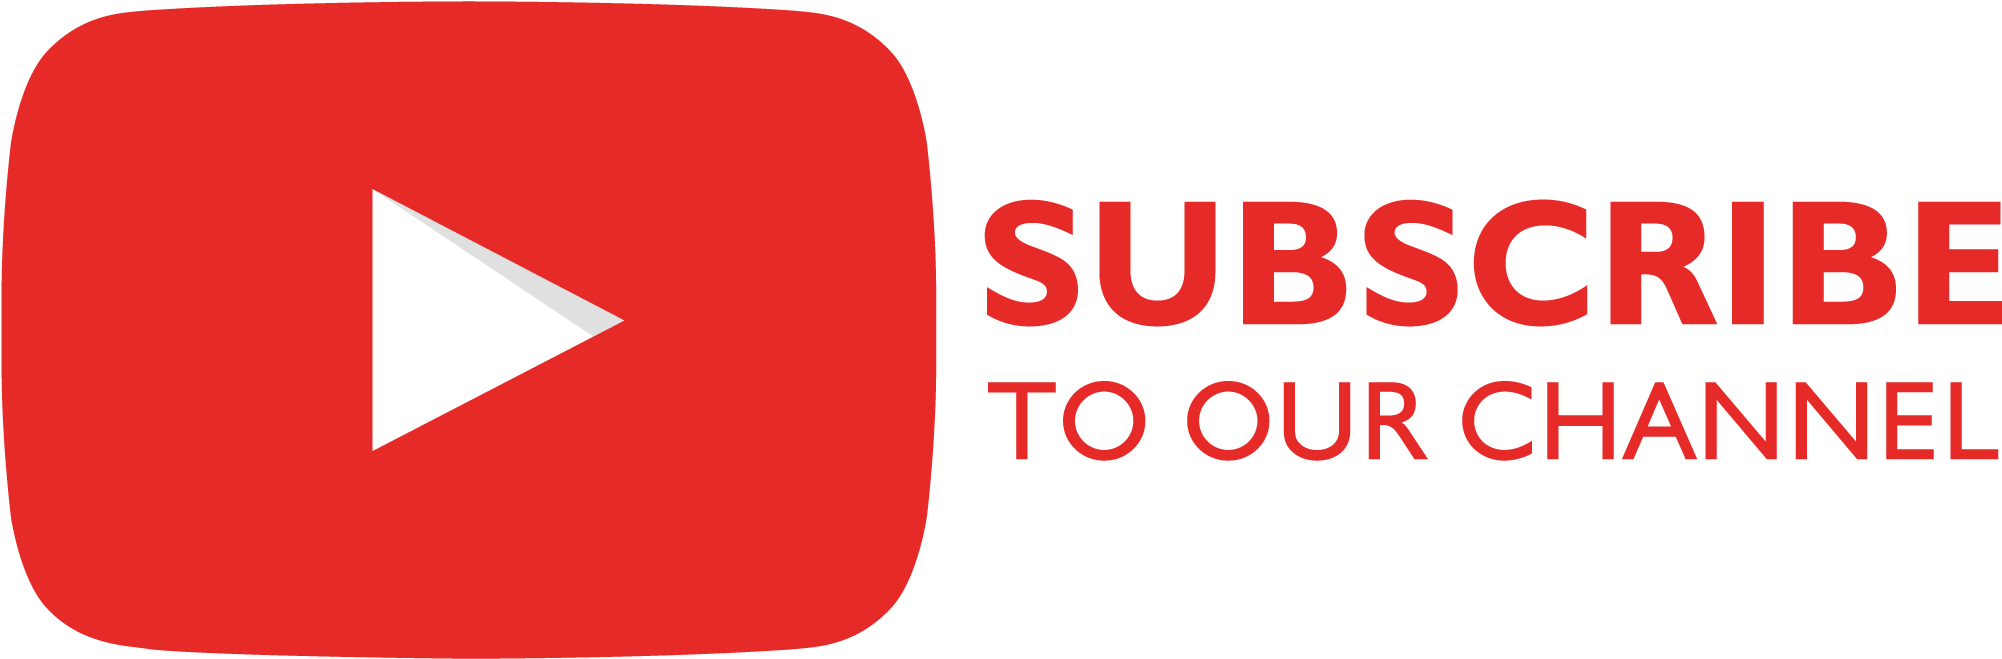 youtube png transparent background